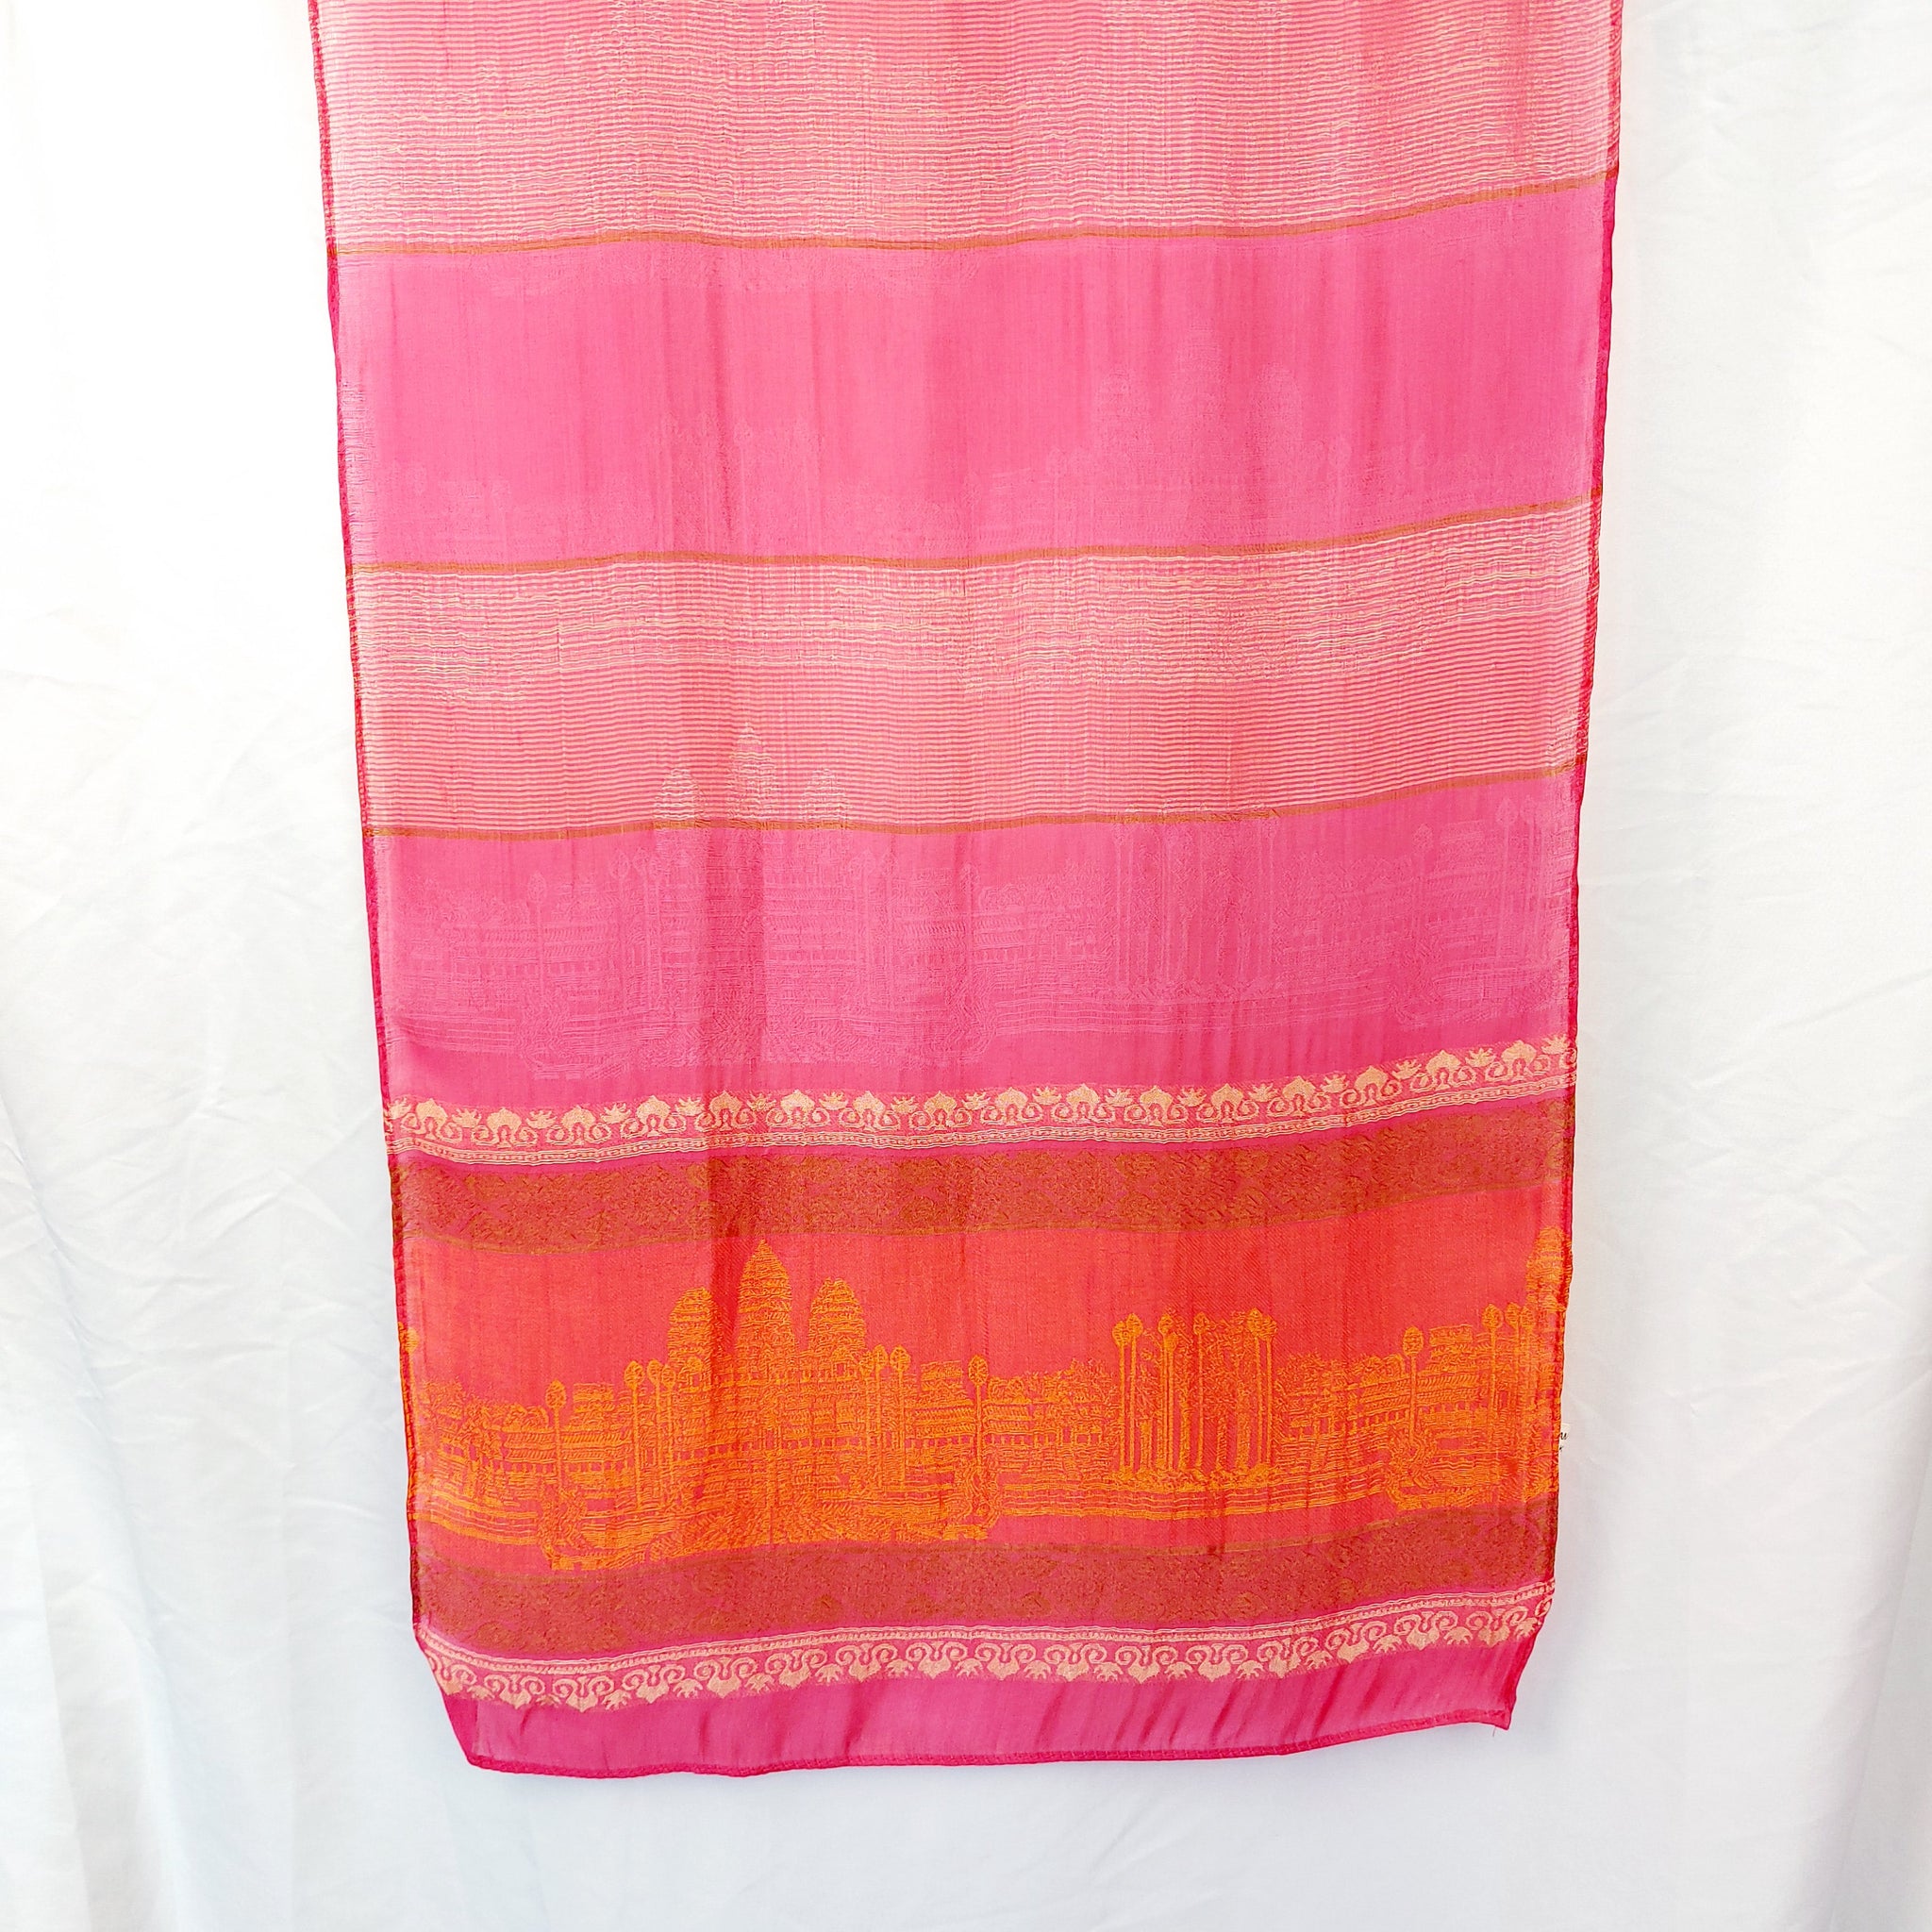 CAMBODIA PINK SCARF